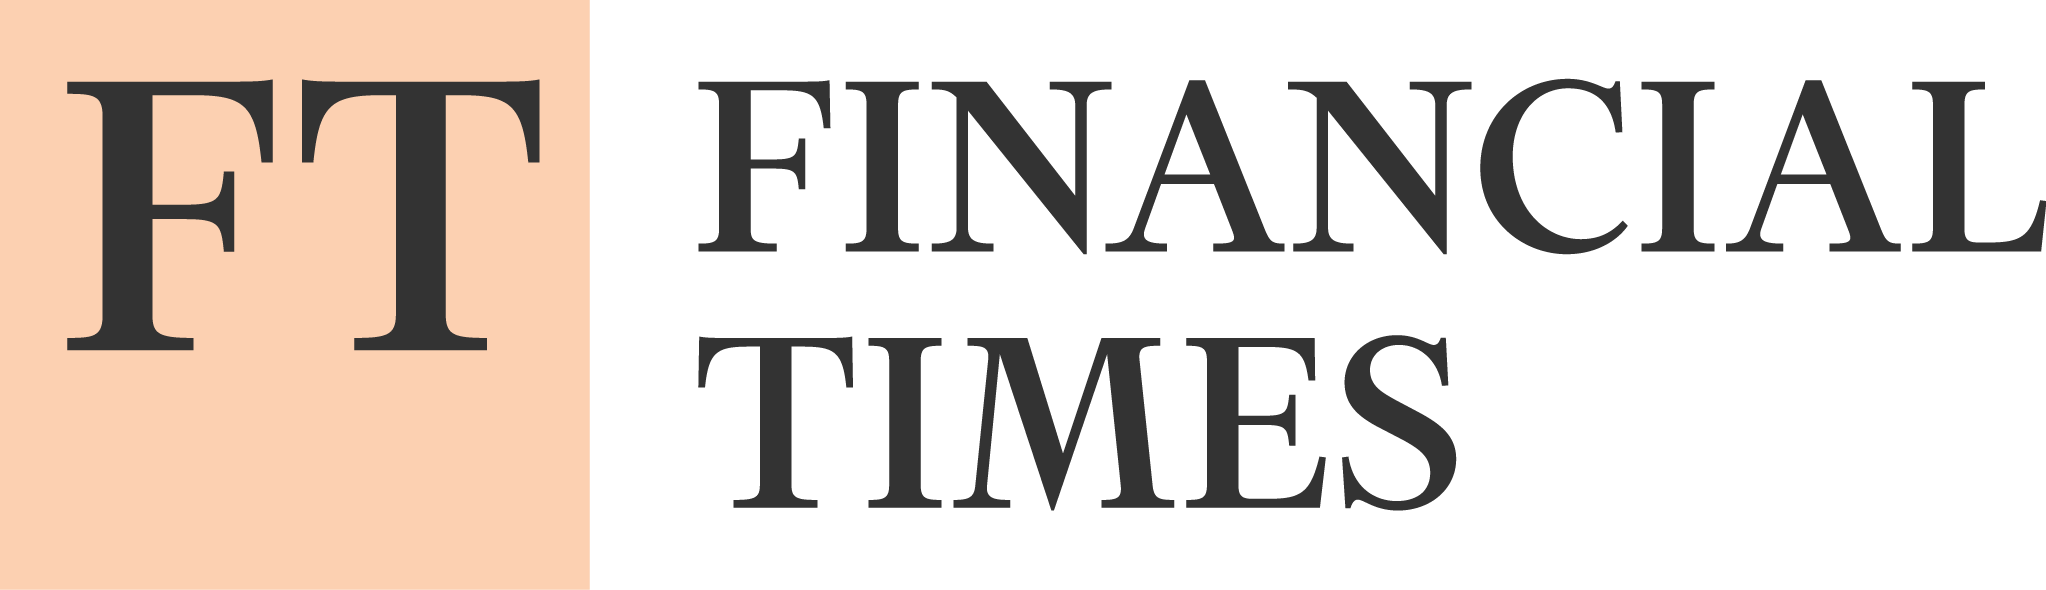 FT _ Financial Times